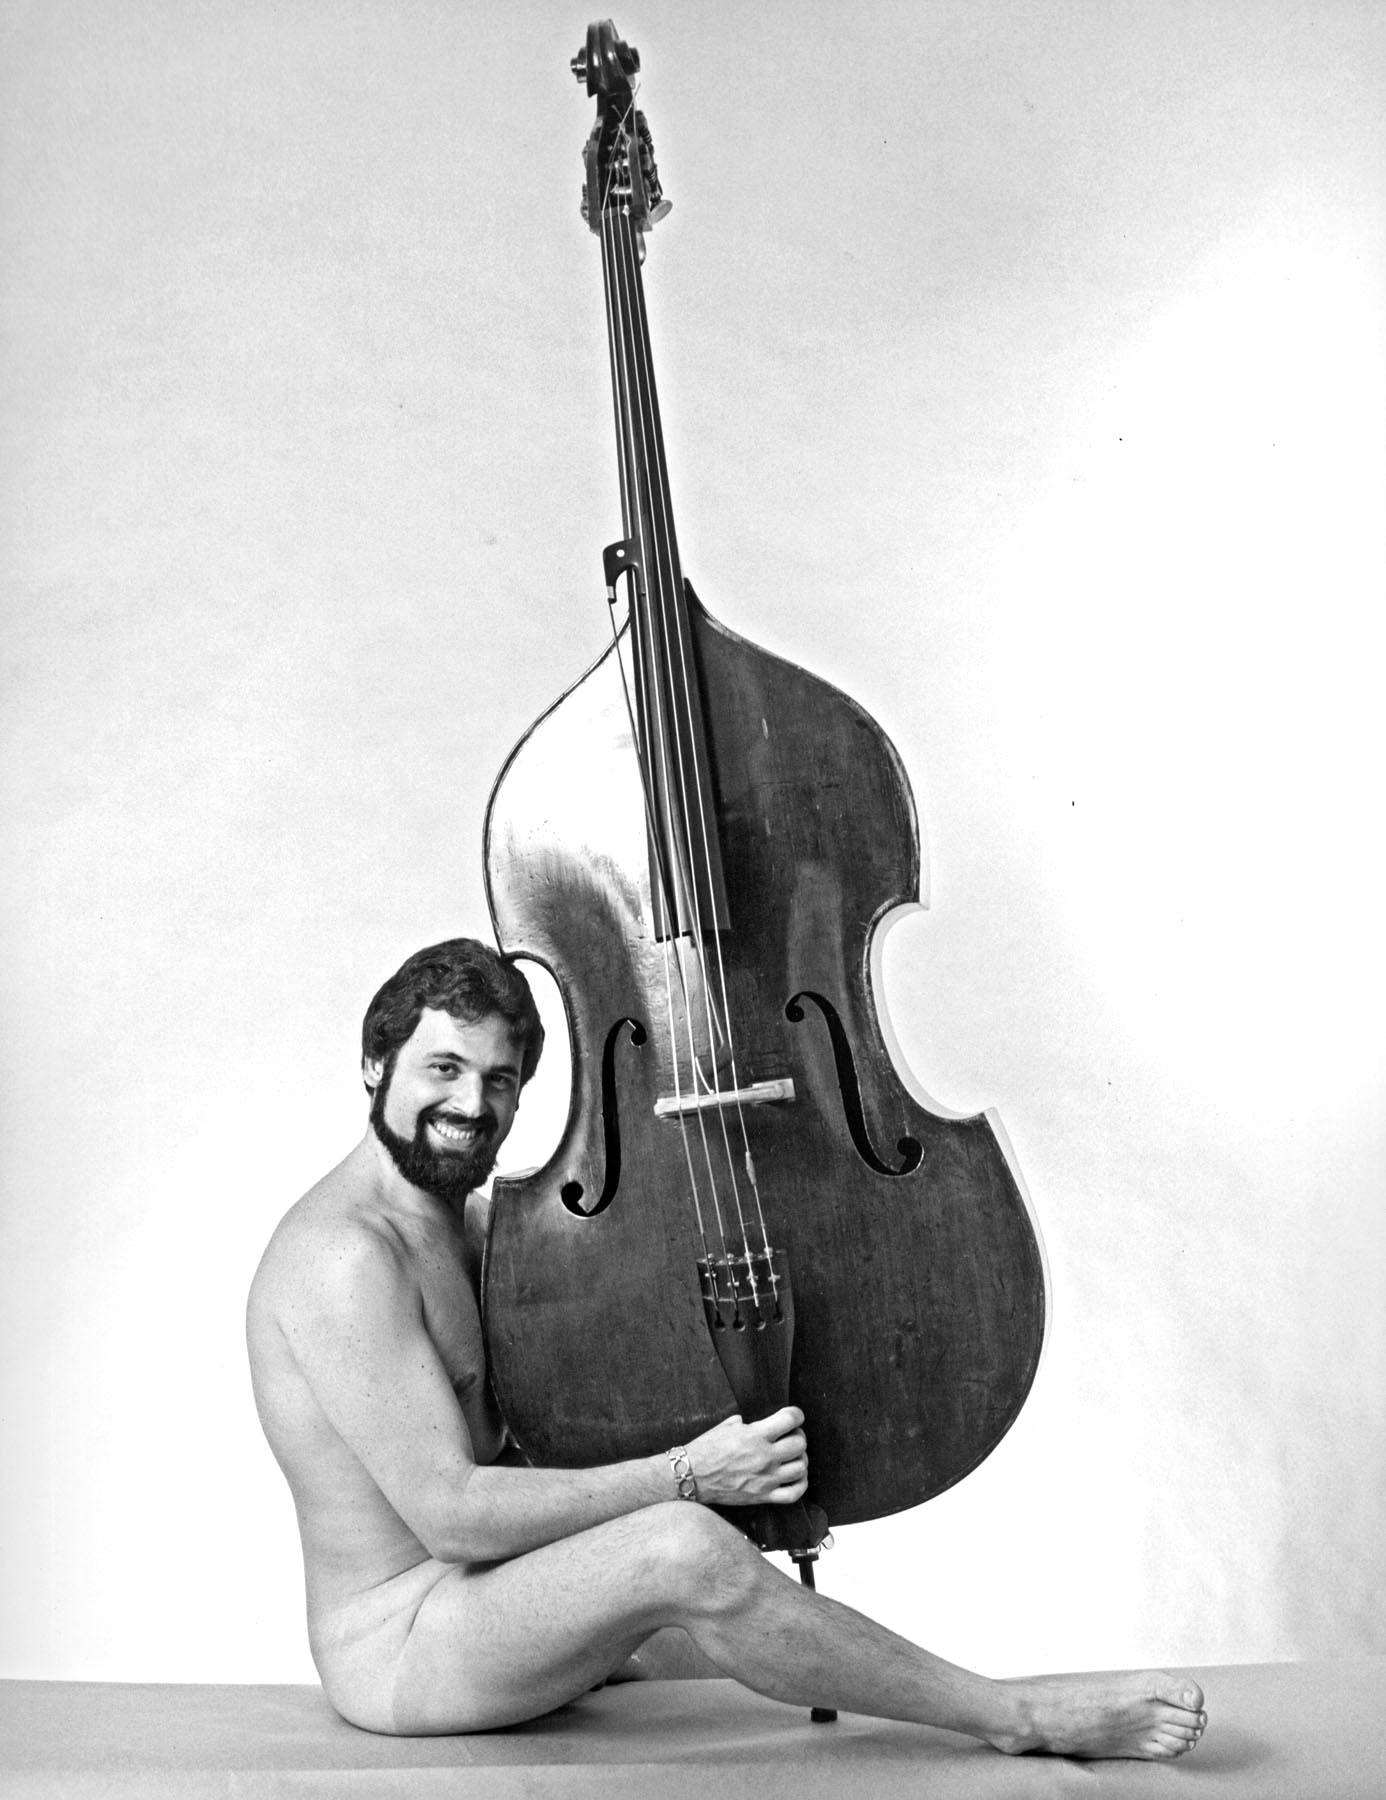 Jack Mitchell Black and White Photograph - American classical bass virtuoso Gary Karr, photographed nude for After Dark